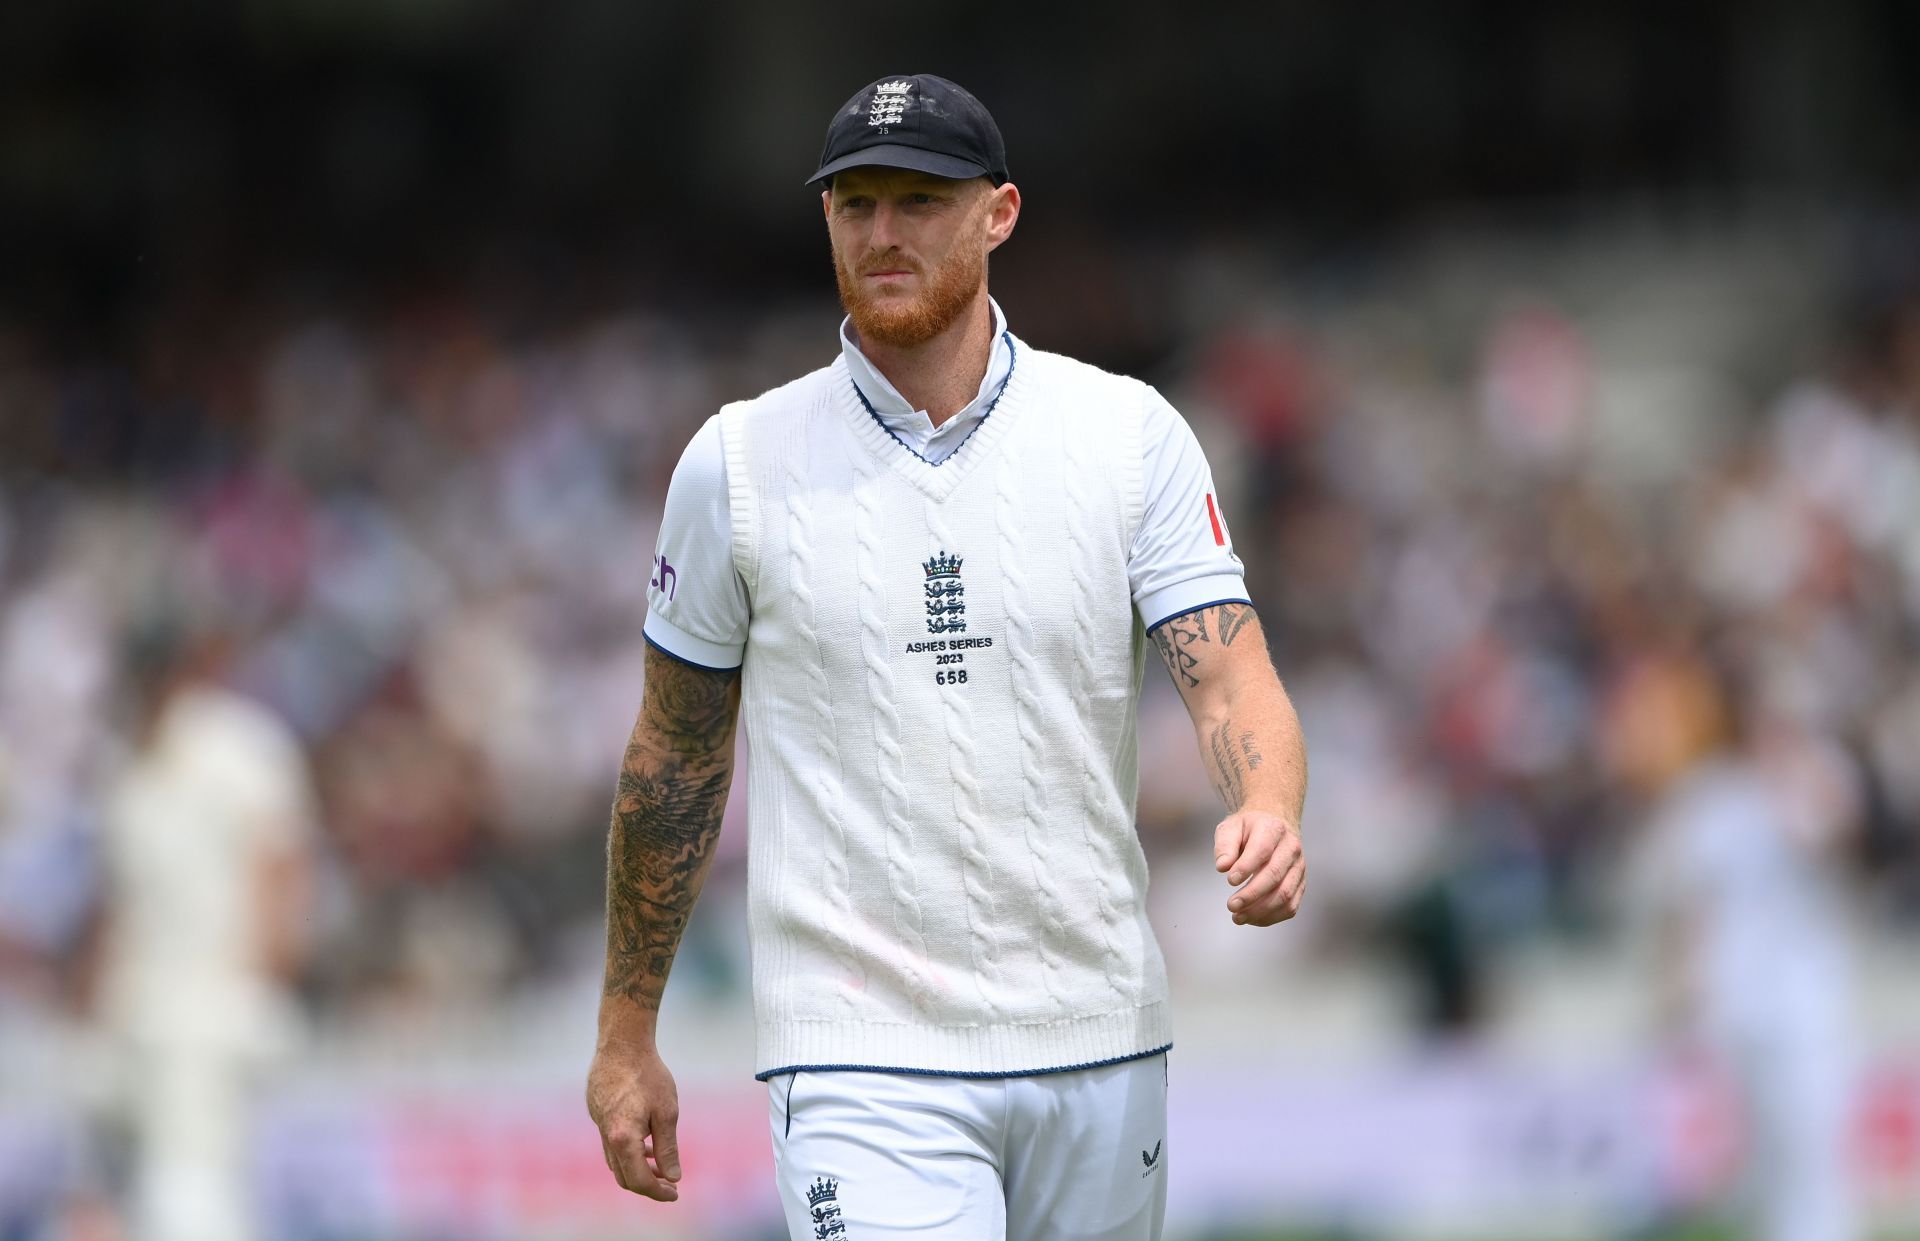 Stokes is the most valuable player in the England side